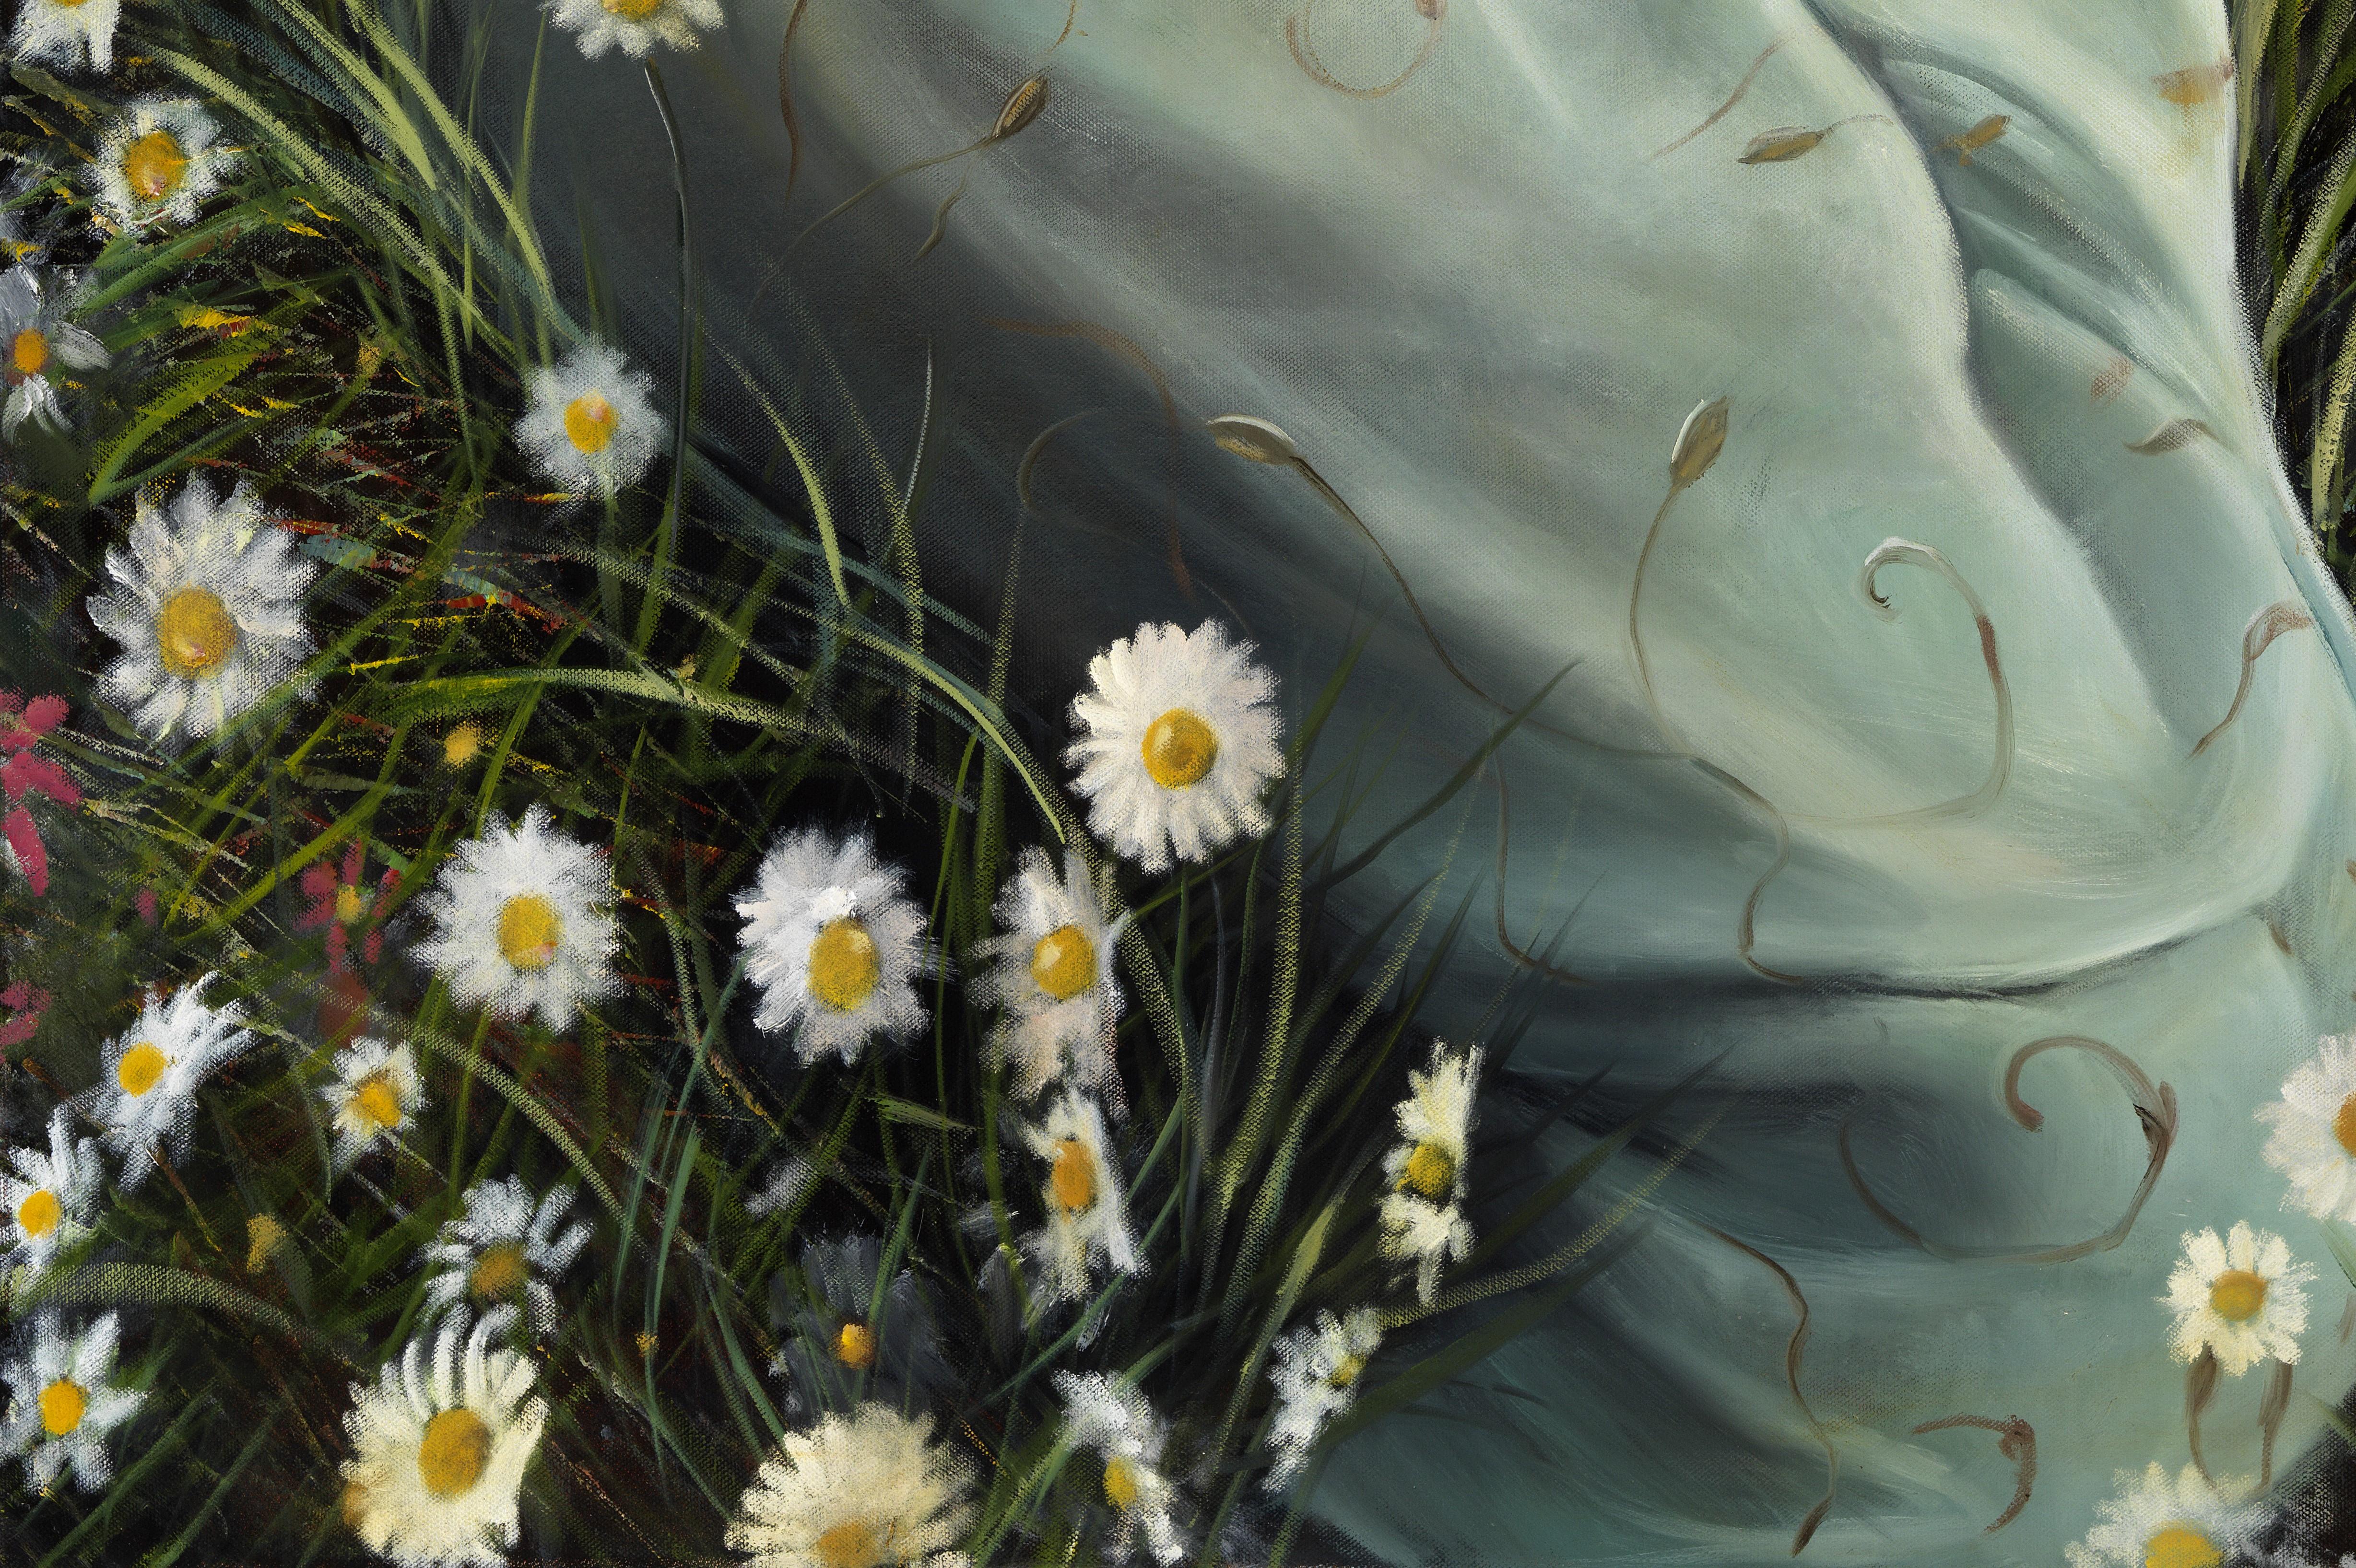 A woman lay sleeping in a field of daisies, her book discarded by her side. The softness of her skin, the flowing fabric of her dress combined with the flowers make a serene and peaceful scene. This intimate portrait is painted with a black trimmed